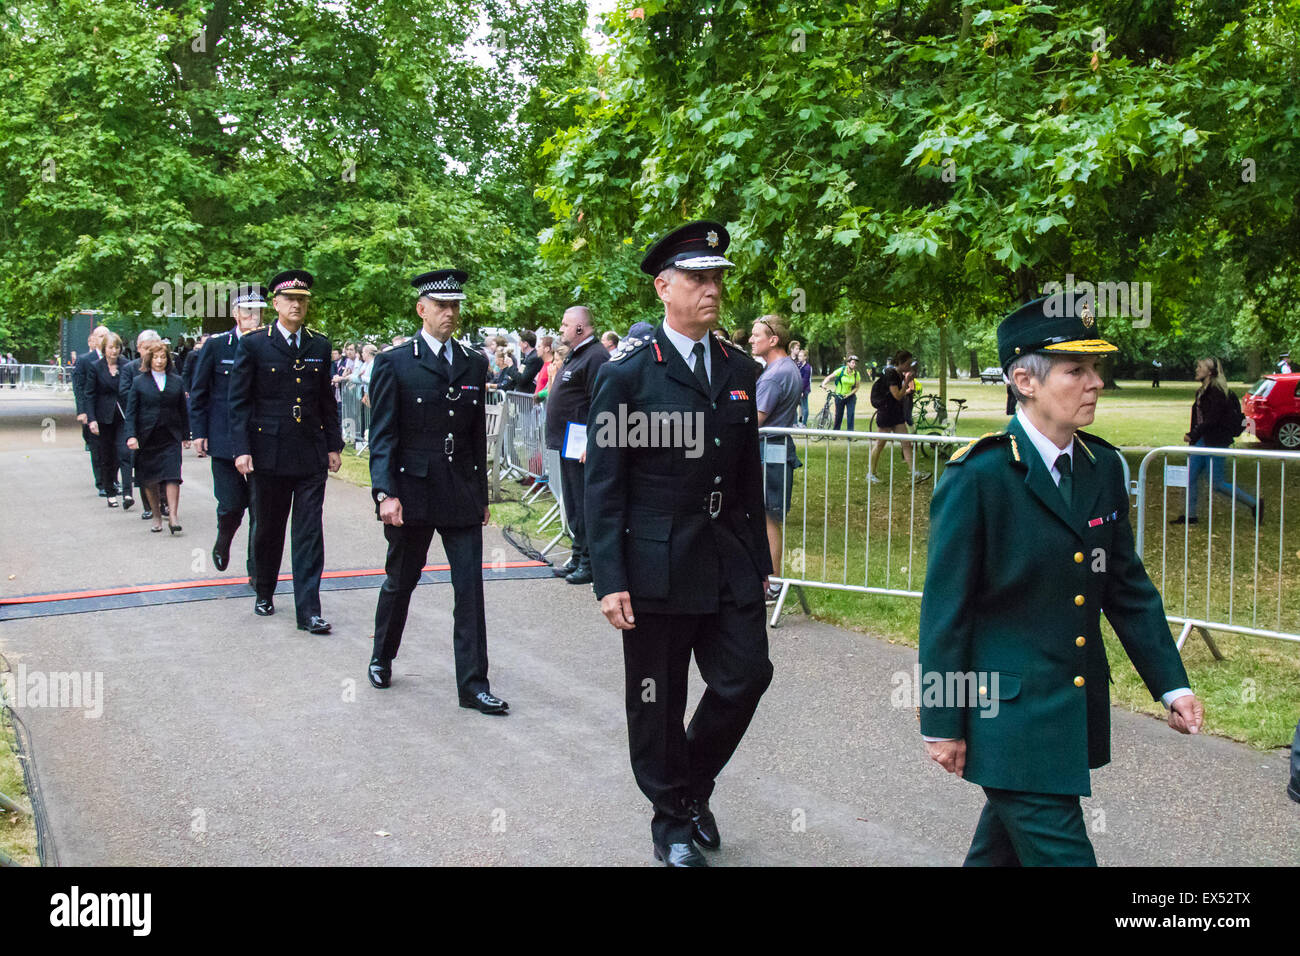 Hyde Park, London, July7th 2015. The Mayor of London Boris Johnson and other senior political figures, the Commissioners for transport and policing in the capital, as well as senior representatives of the emergency services lay wreaths at the 7/7 memorial in Hyde Park. Credit:  Paul Davey/Alamy Live News Stock Photo